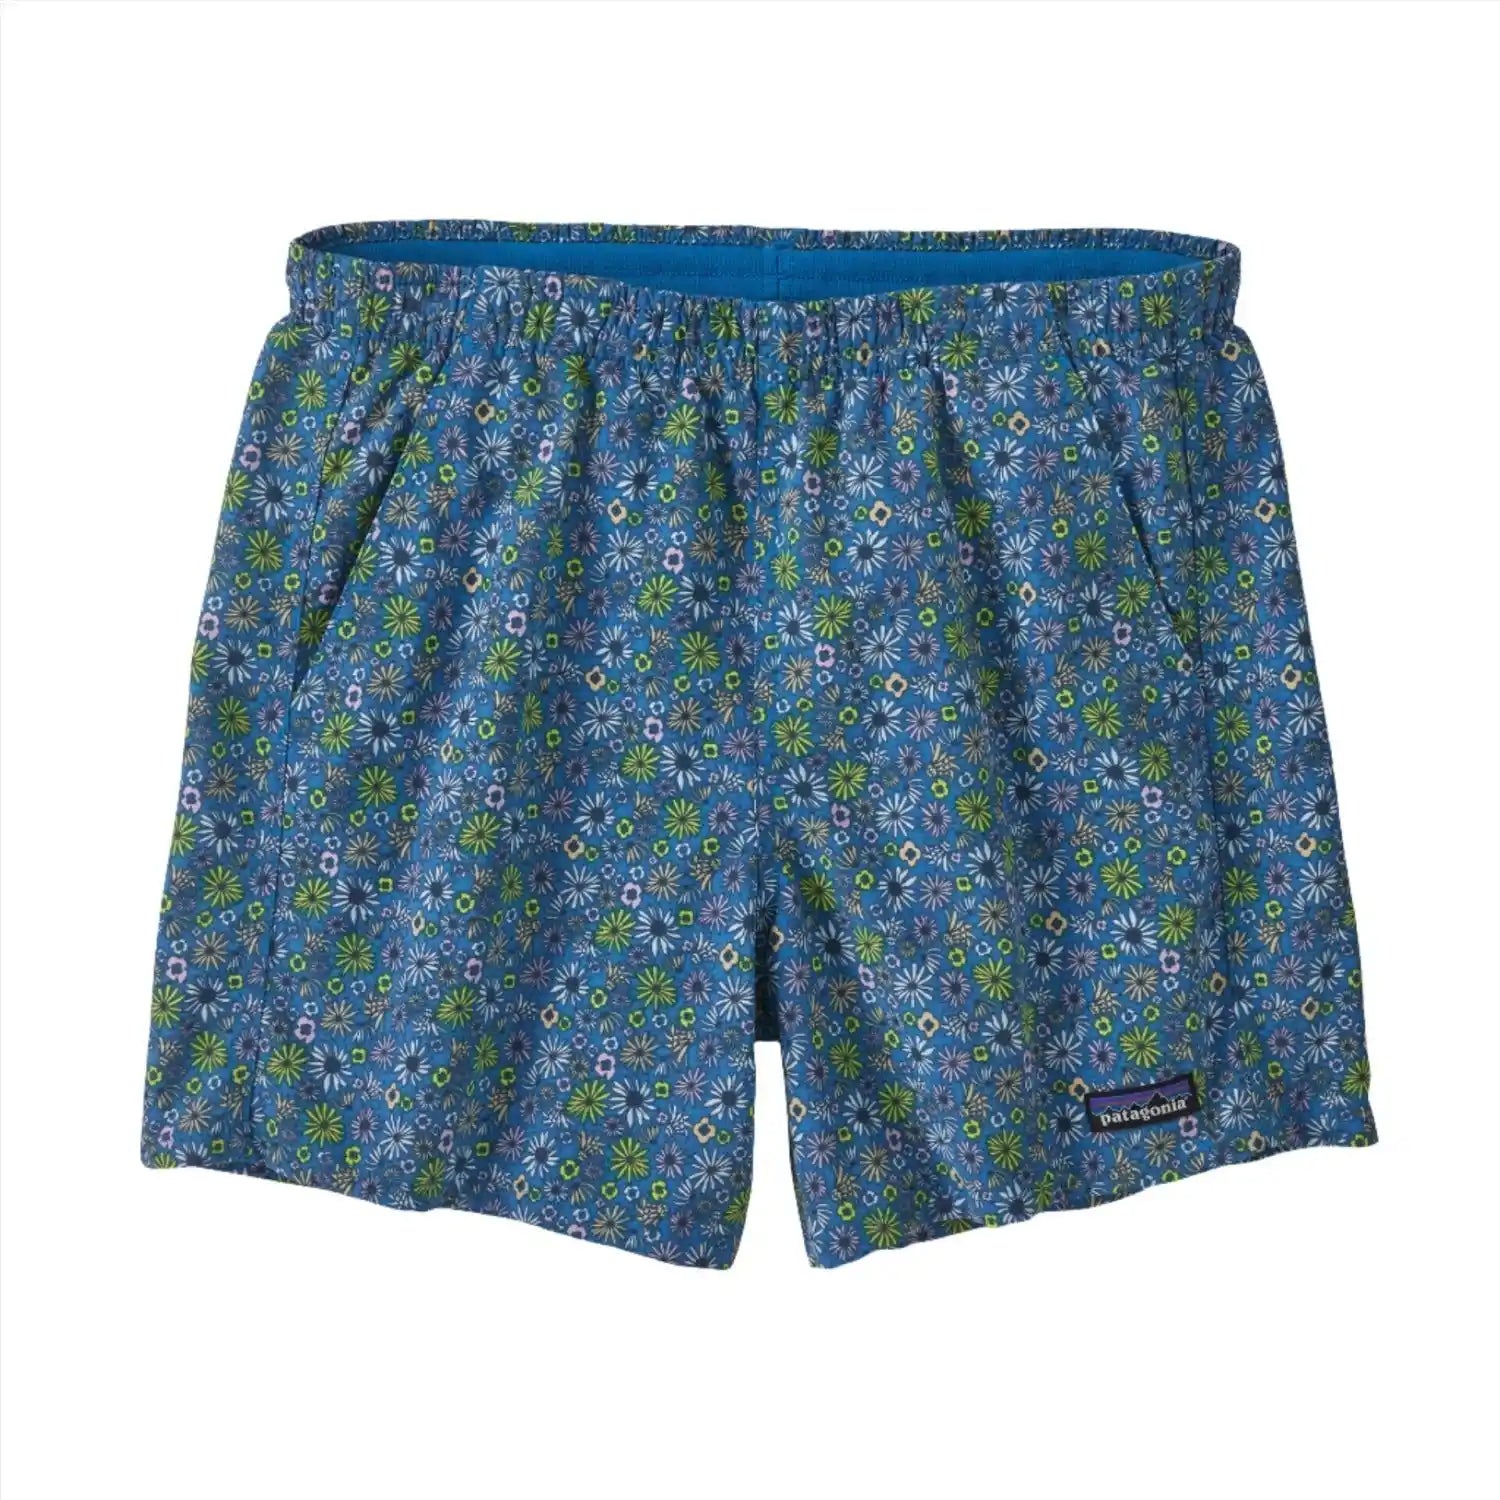 Patagonia W's Baggies™ Shorts - 5", Floral Fun Vessel Blue, front view flat 